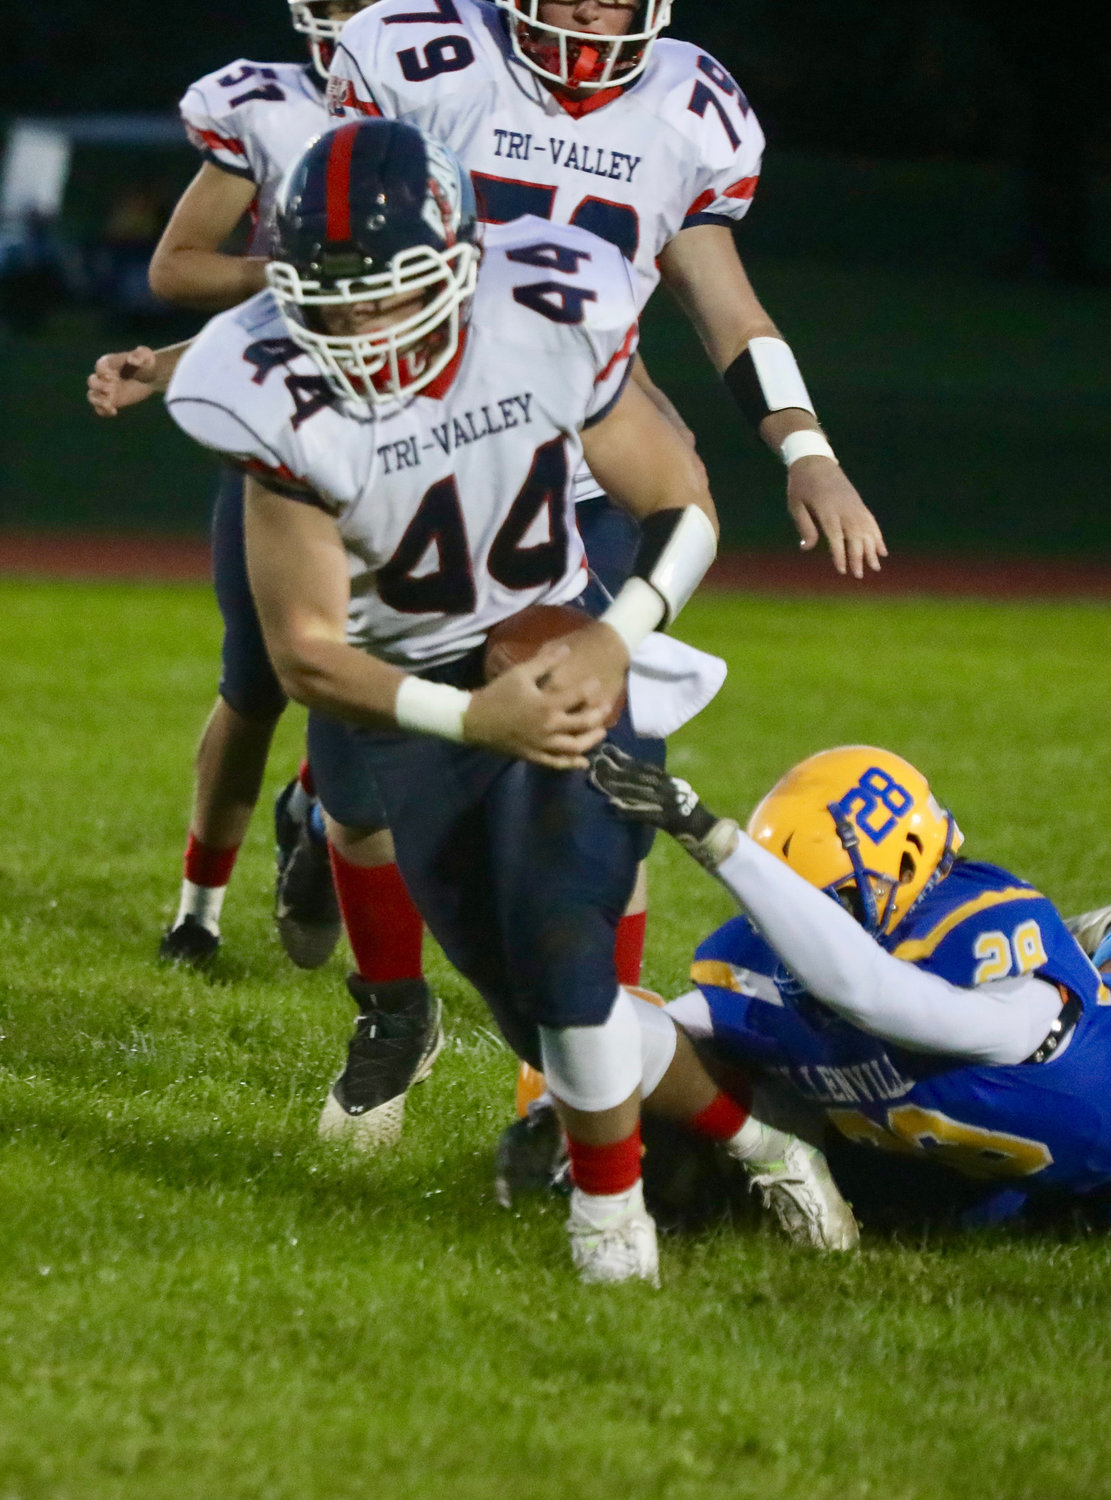 Tri-Valley senior running back Dylan Poley breaks a tackle and advances the ball up the field. Poley is not only a fierce runner, he is also a defensive standout.